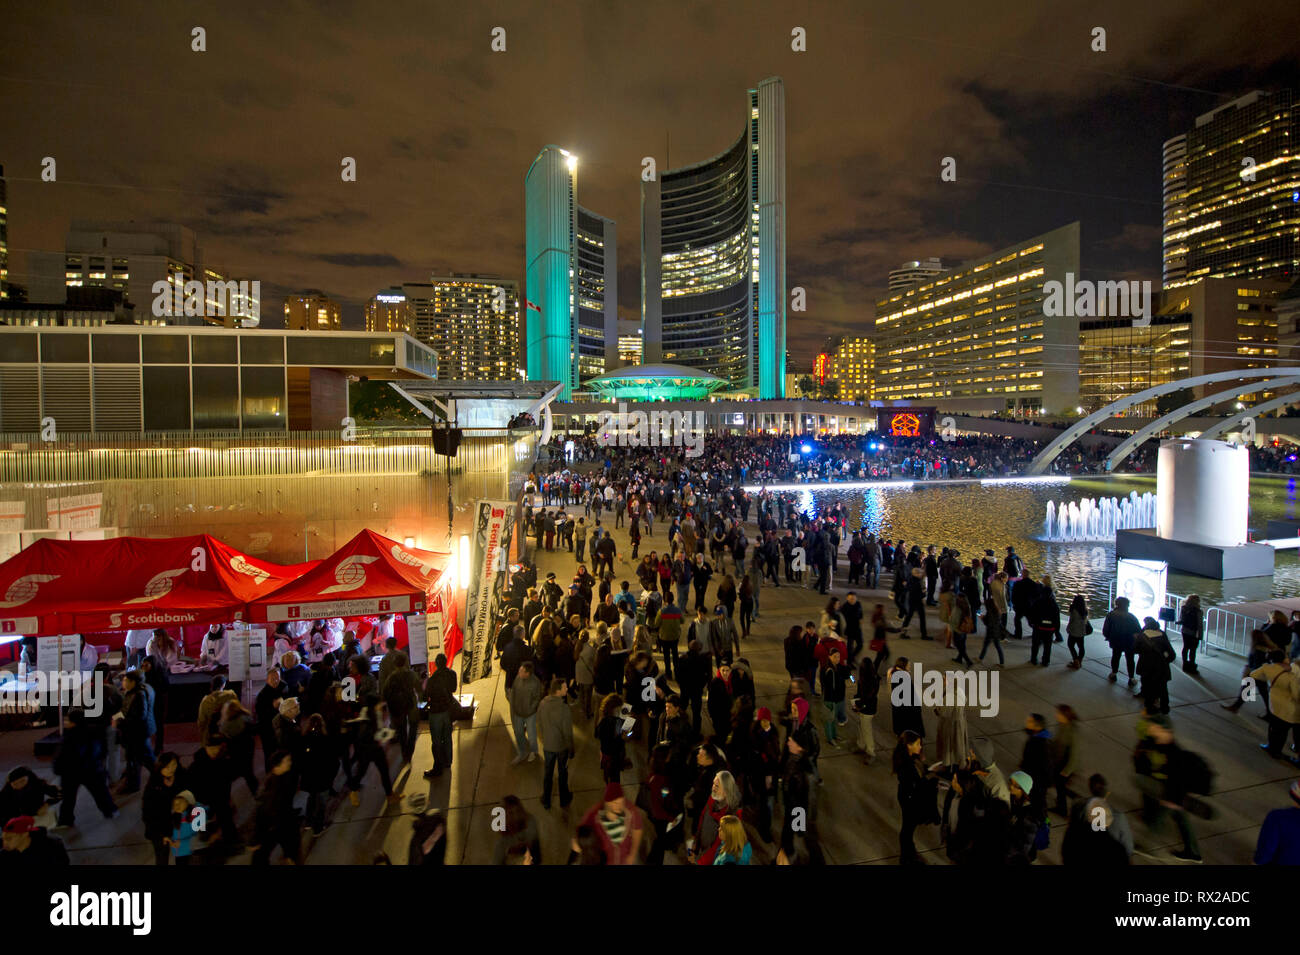 Crowds on Nathan Phillips Square in Toronto during Nuit Blanche contemporary art event Stock Photo